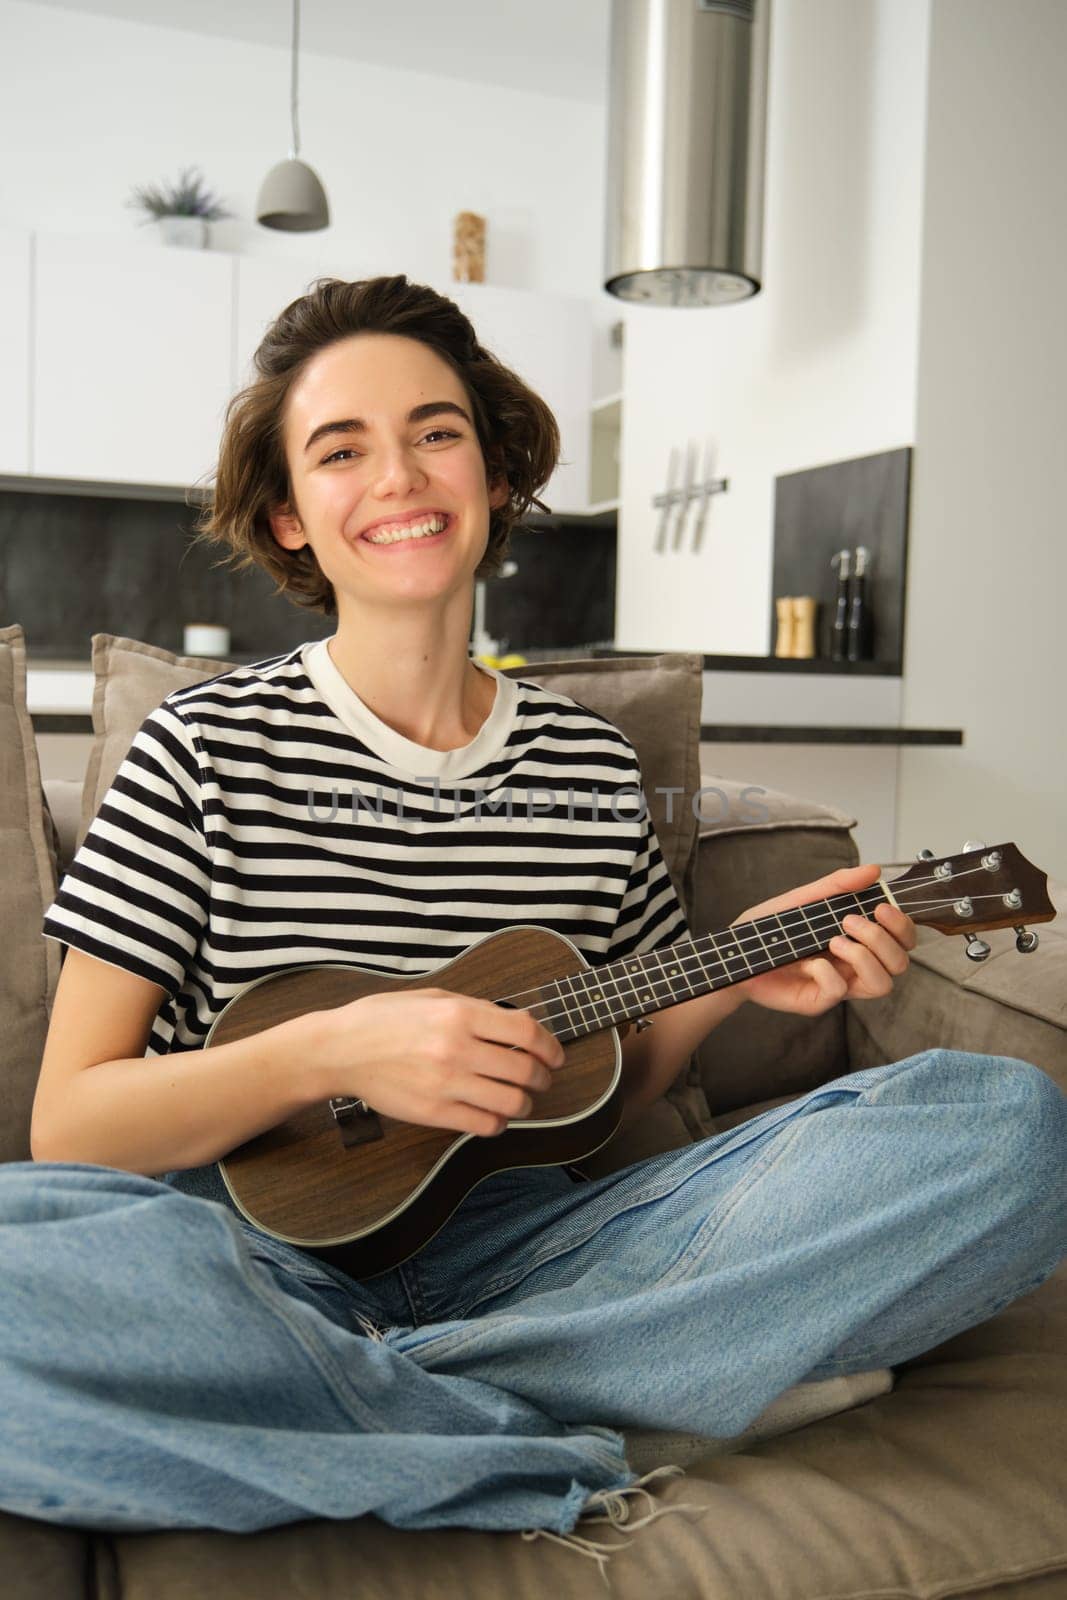 Vertical shot of young musician, woman learns how to play ukulele, sits on sofa with crossed legs and smiling at camera.